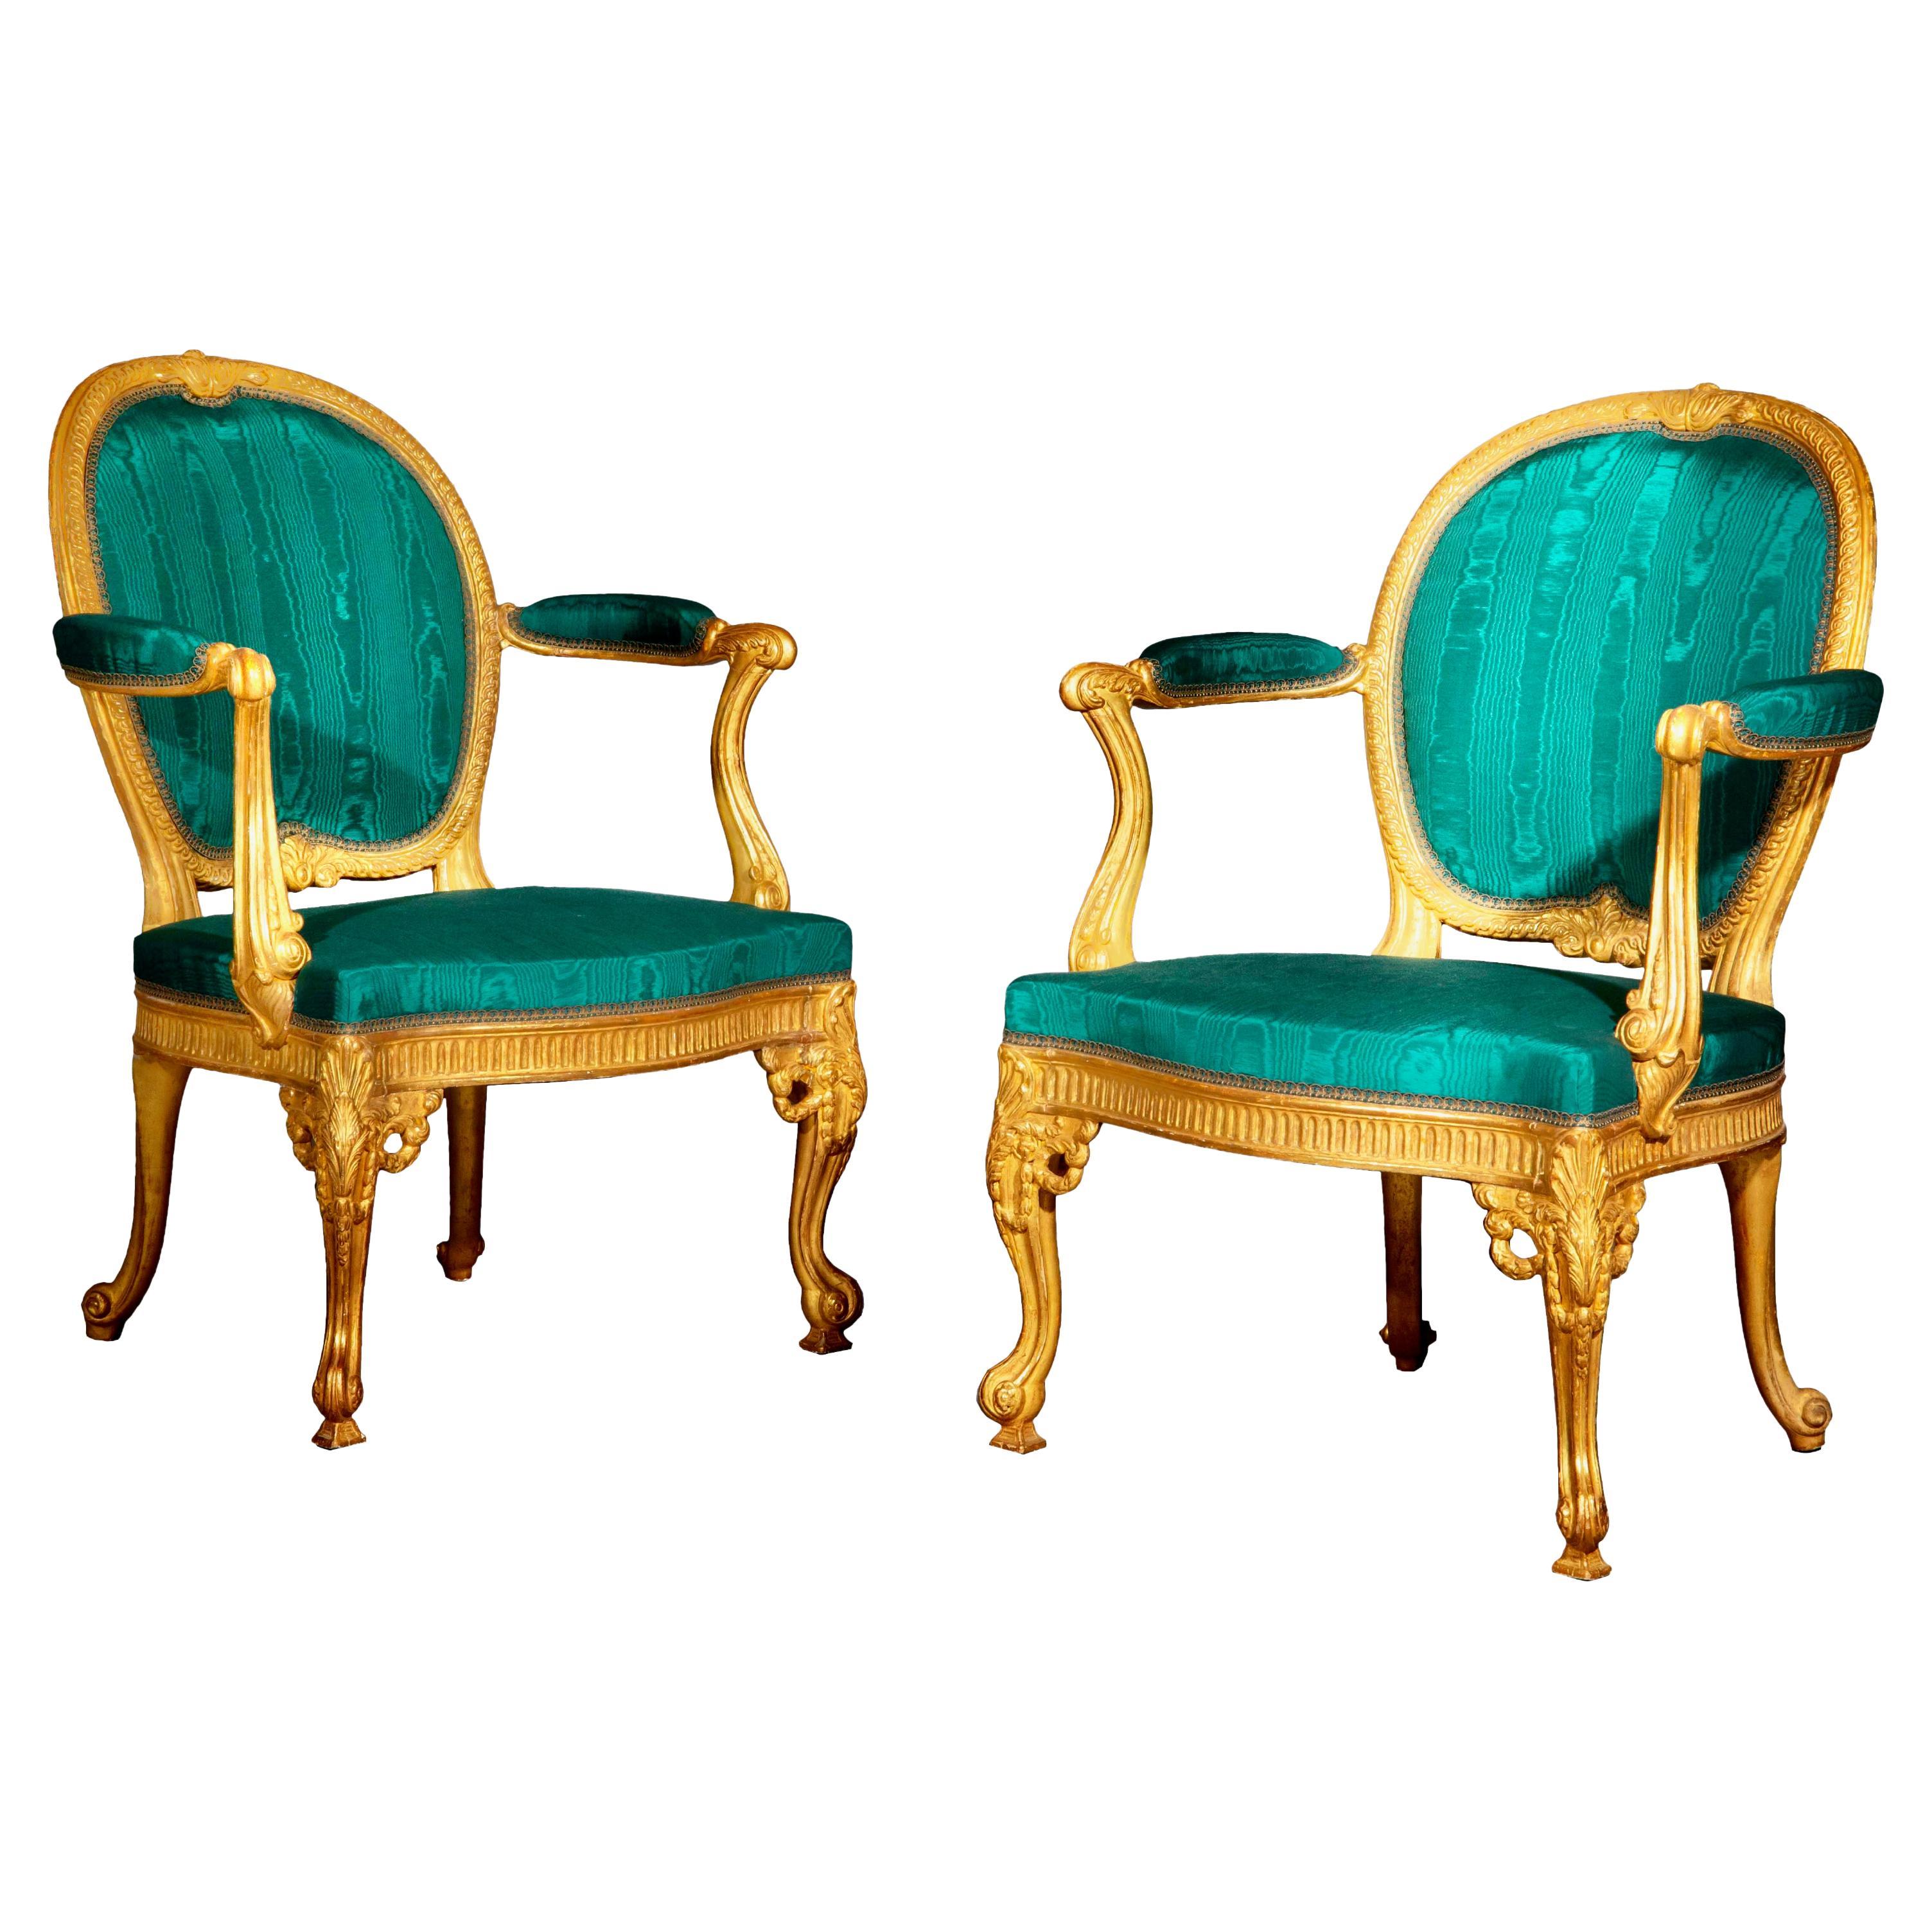 Pair of Giltwood Armchairs after Thomas Chippendale